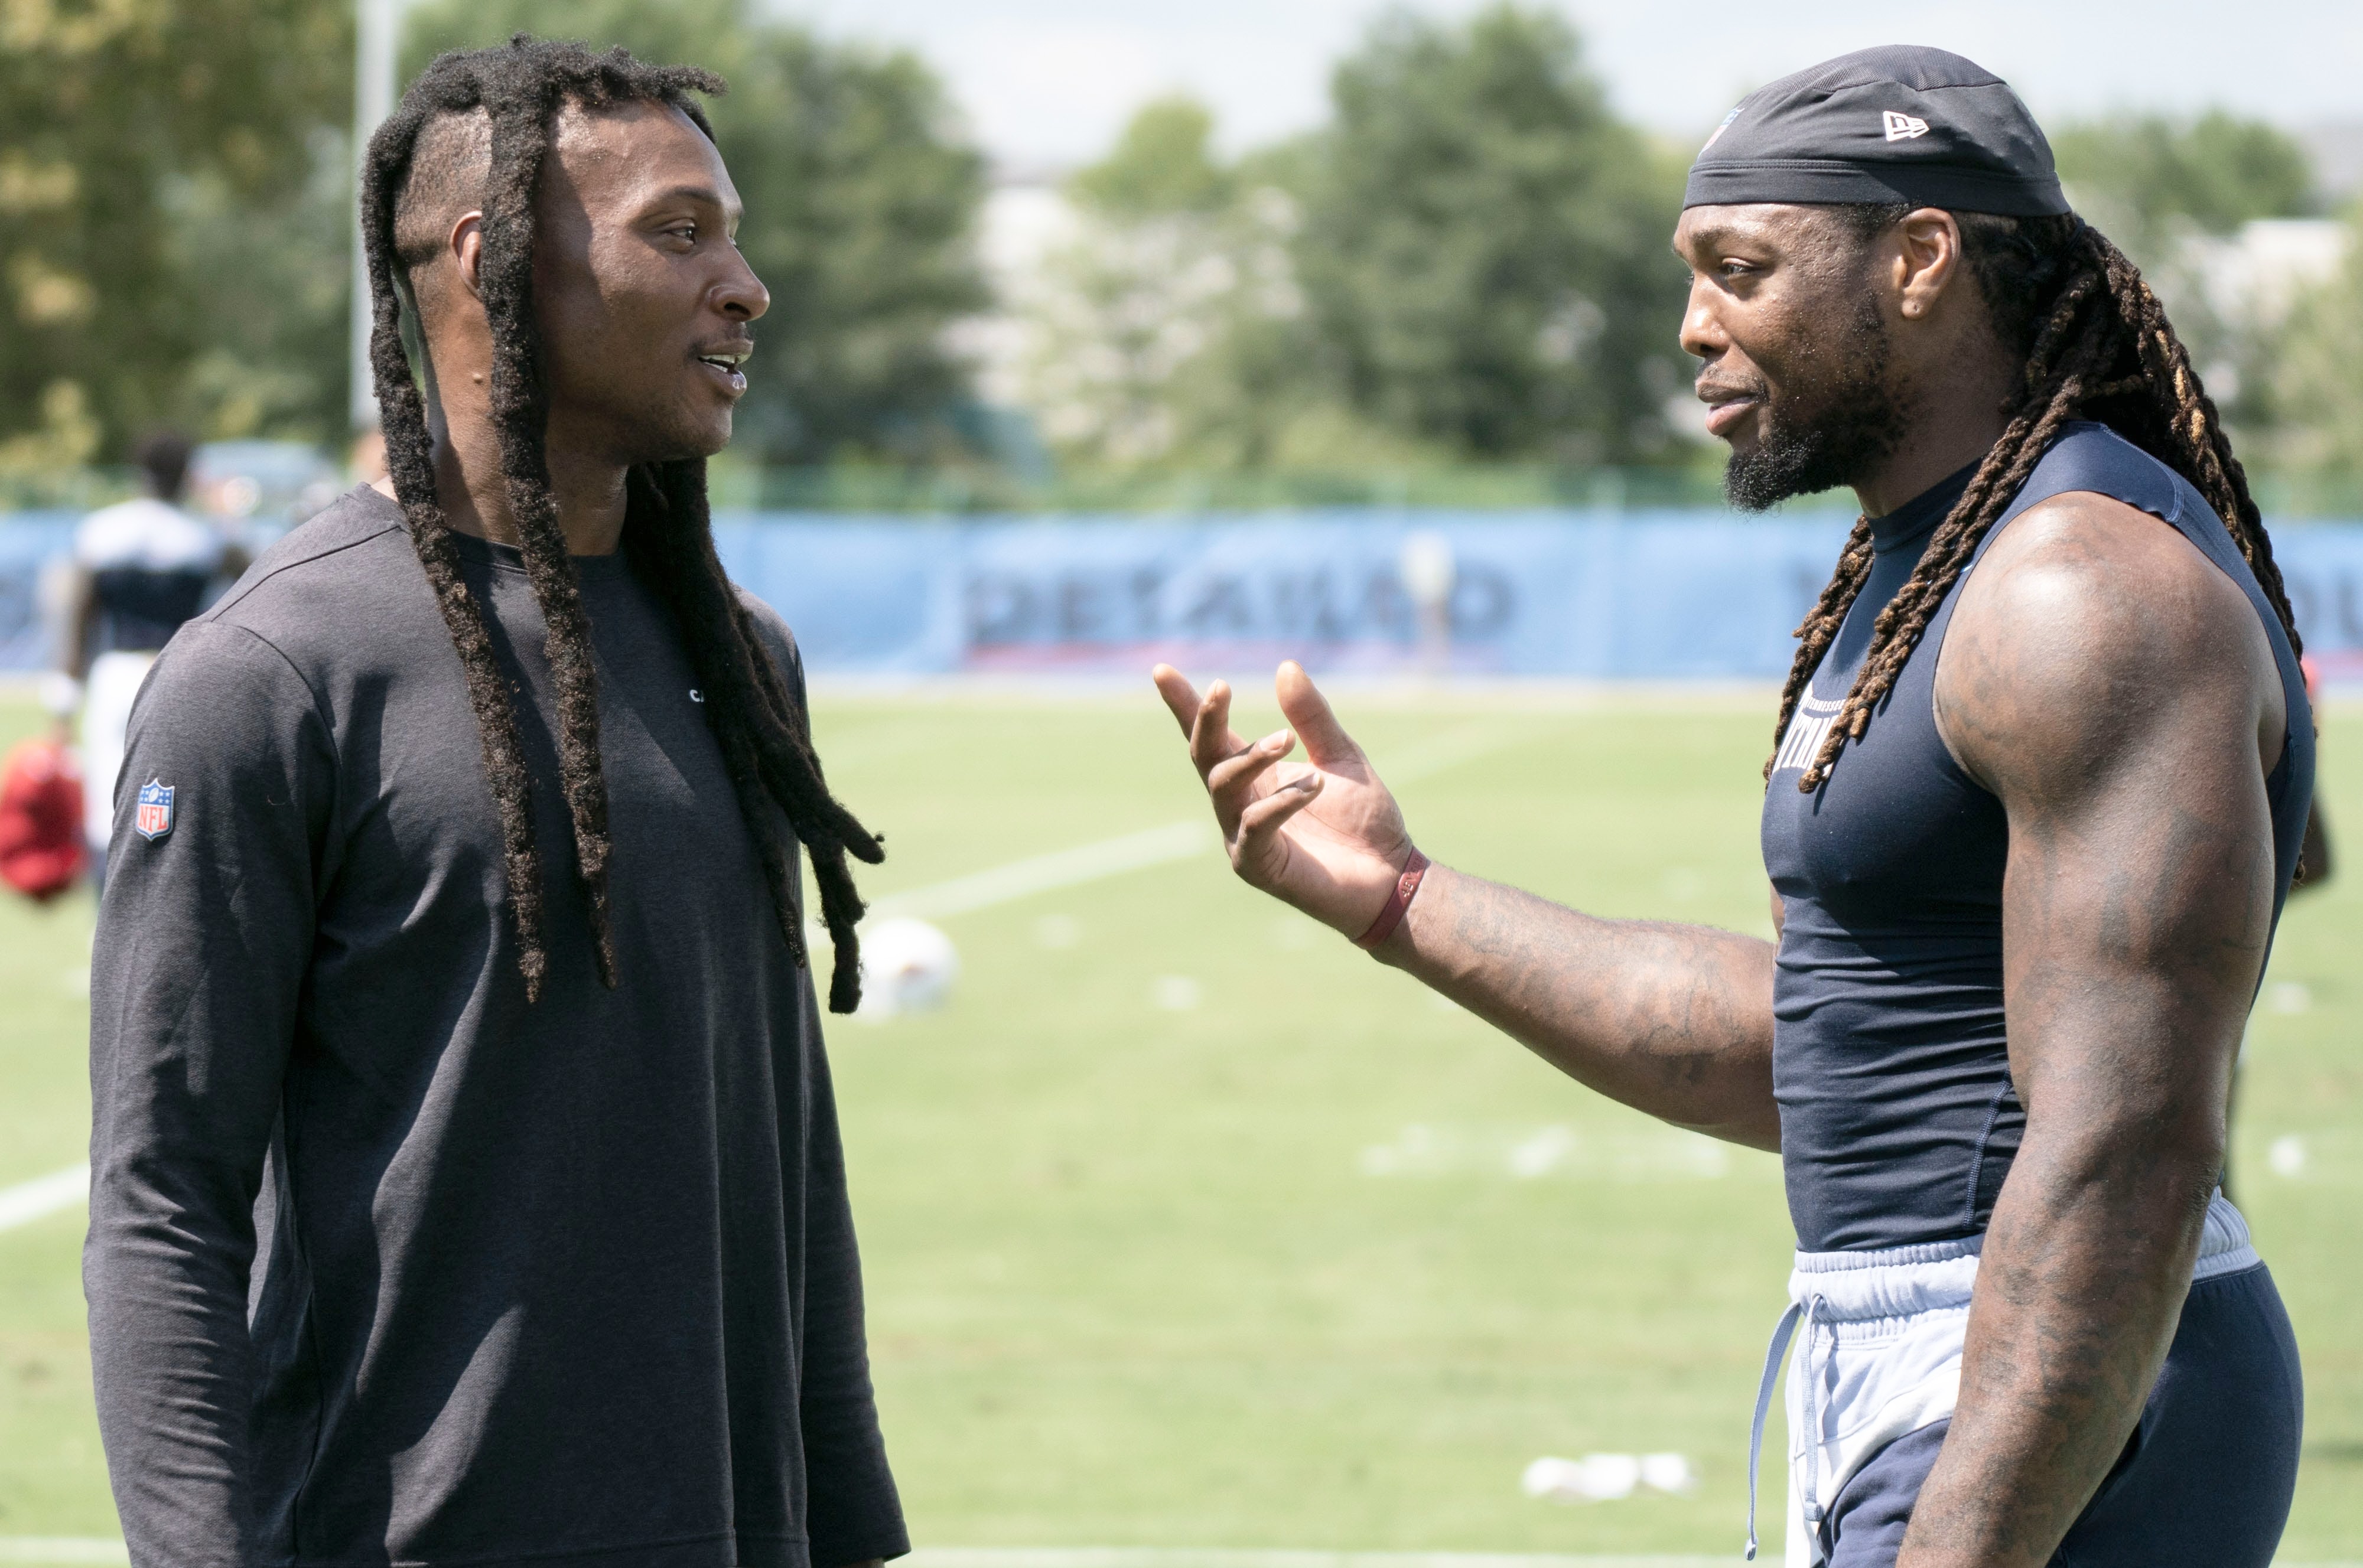 Arizona Cardinals wide receiver DeAndre Hopkins talks with Tennessee Titans running back Derrick Henry after a joint training camp practice at Ascension Saint Thomas Sports Park Wednesday, Aug. 24, 2022, in Nashville, Tenn.